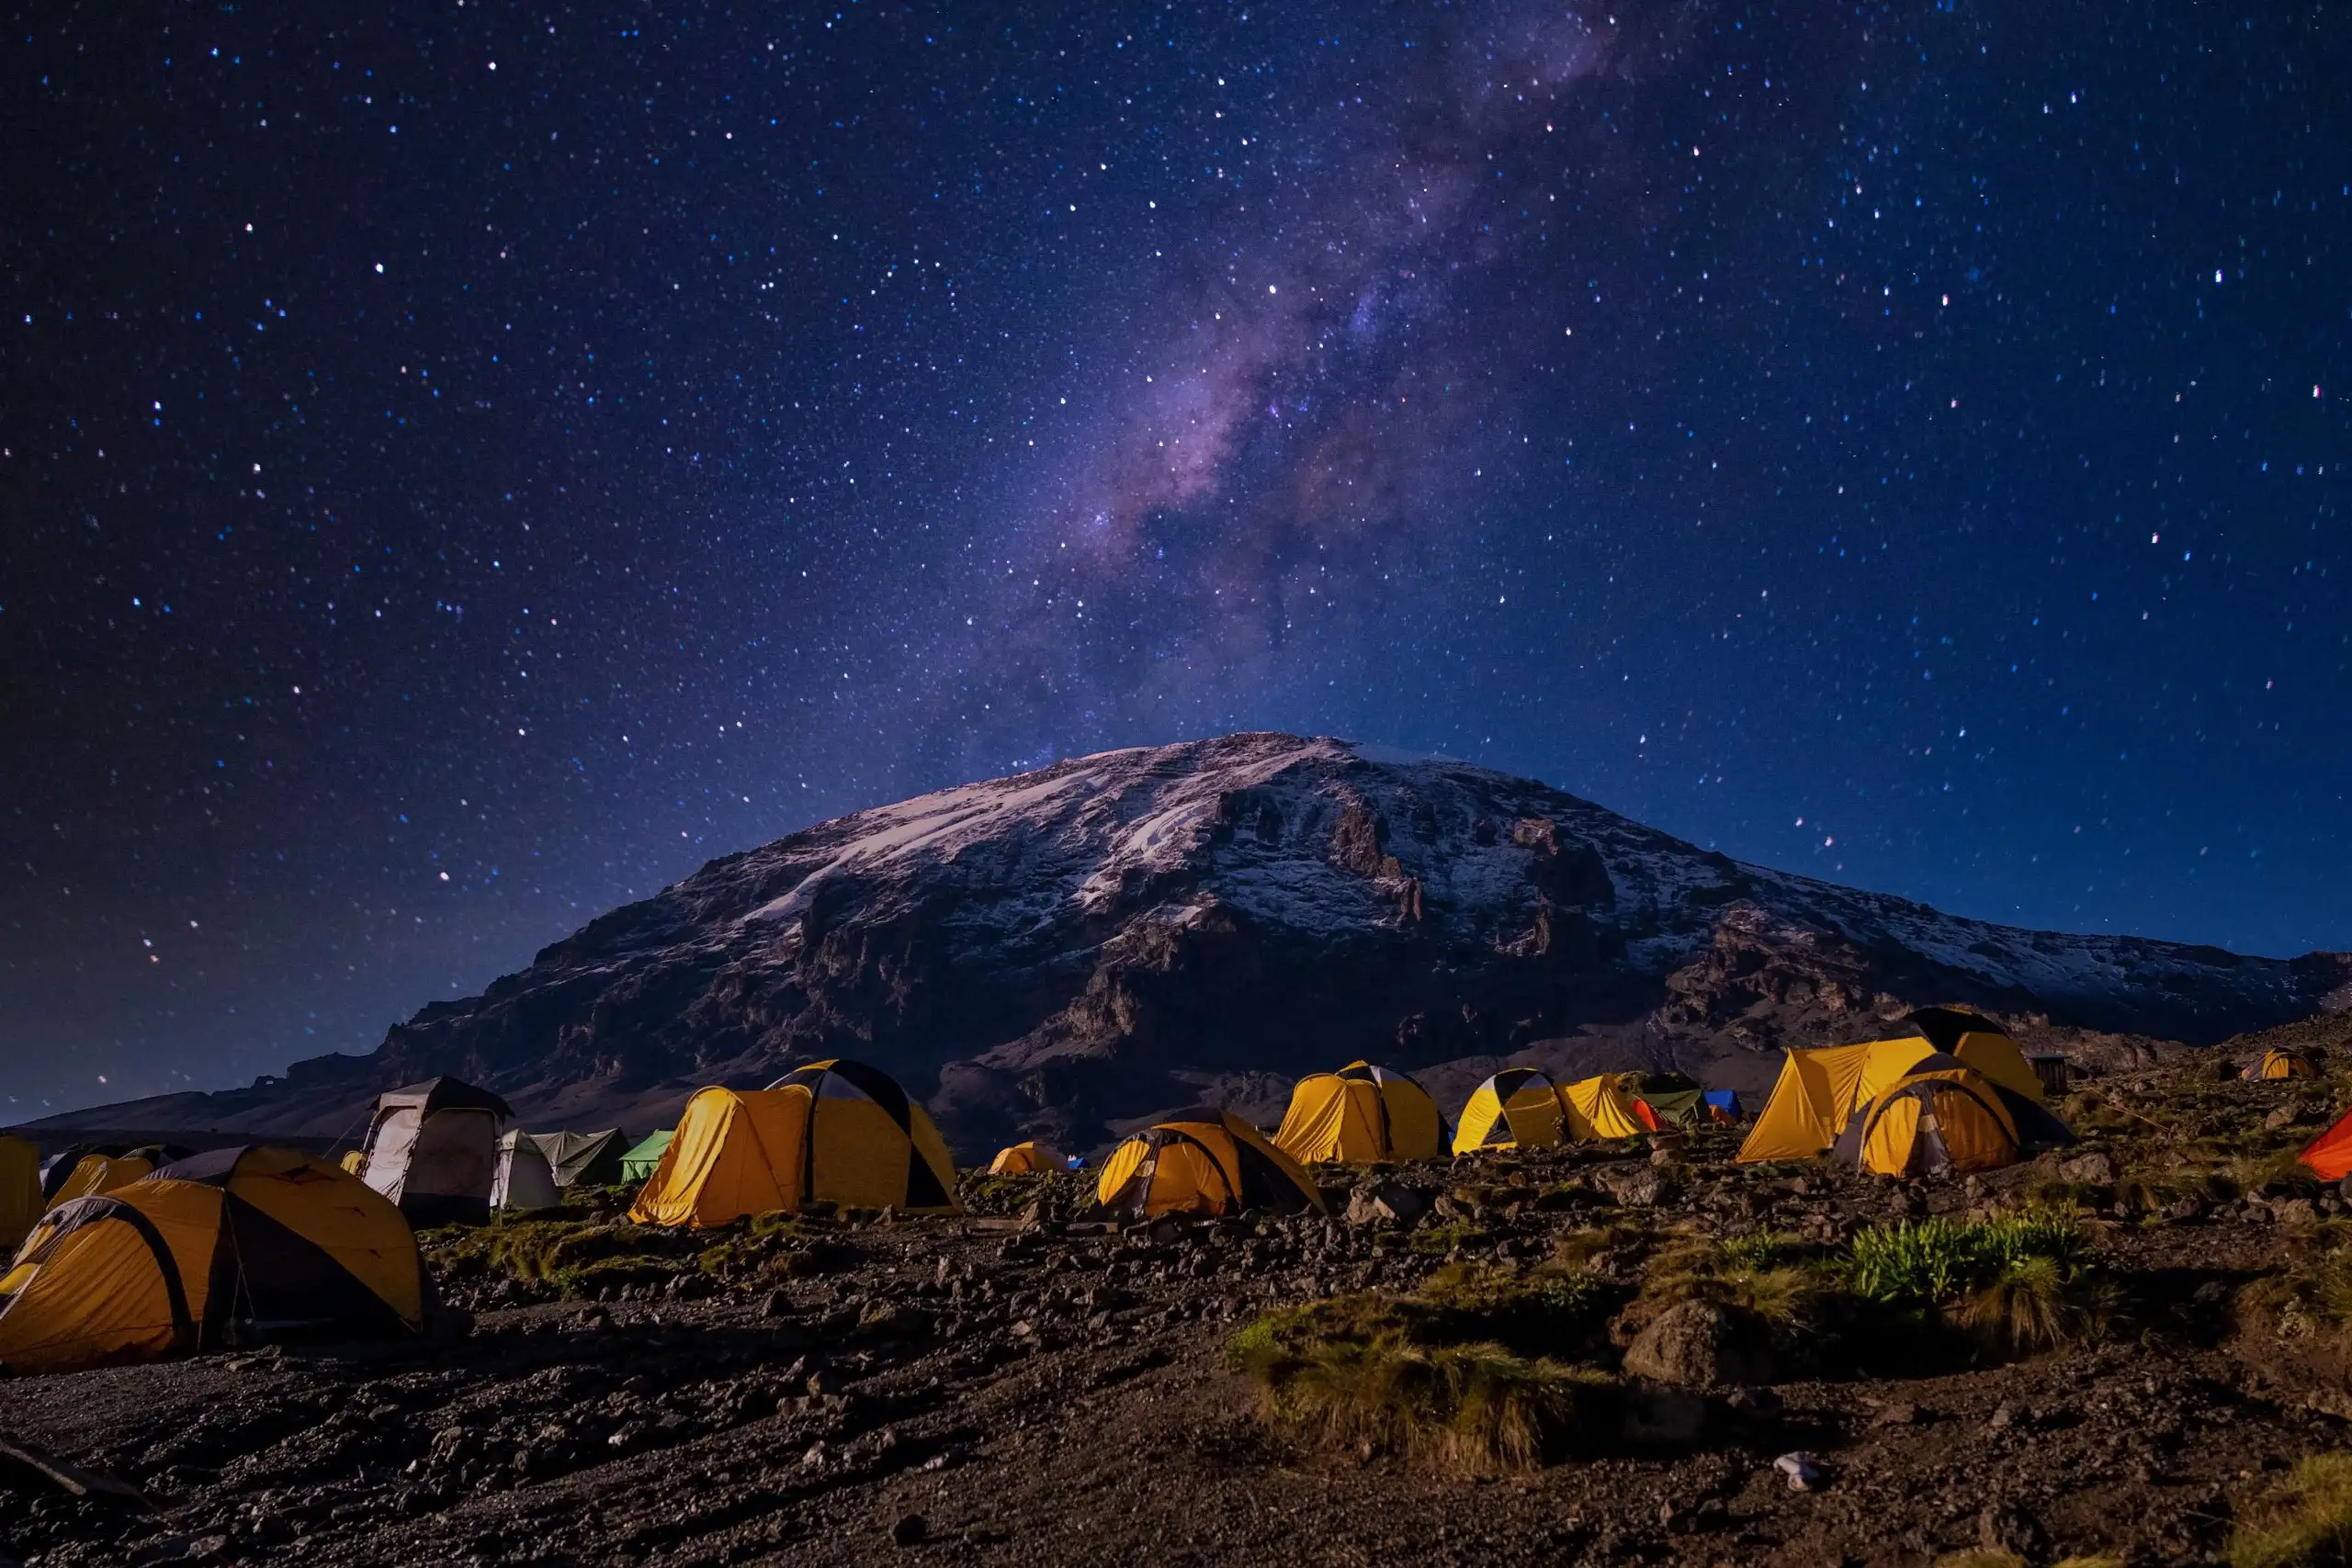 Climbing Kilimanjaro - Summit Mount Kilimanjaro, Luxury Kilimanjaro Climb Tours, Mount Kilimanjaro's Amazing Range Of Climates, Why Do Climbers Summit Kilimanjaro at Night? Searching for the best sleeping pad for climbing Kilimanjaro? Discover top-rated sleeping pads and expert insights for a comfortable mountain adventure. Why We Recommend Crampons For Every Kilimanjaro Trek, Can I Climb Kilimanjaro With No Training?, Climbing Kilimanjaro Success Rates by Routes, Things You Must Do To Make It Up Kilimanjaro, Kilimanjaro National Park, What Celebrities Have Climbed Kilimanjaro? Why Choose Northern Circuit Route for Your Kilimanjaro Climb, Diamox, Climbing Kilimanjaro in August, Climbing Kilimanjaro in February